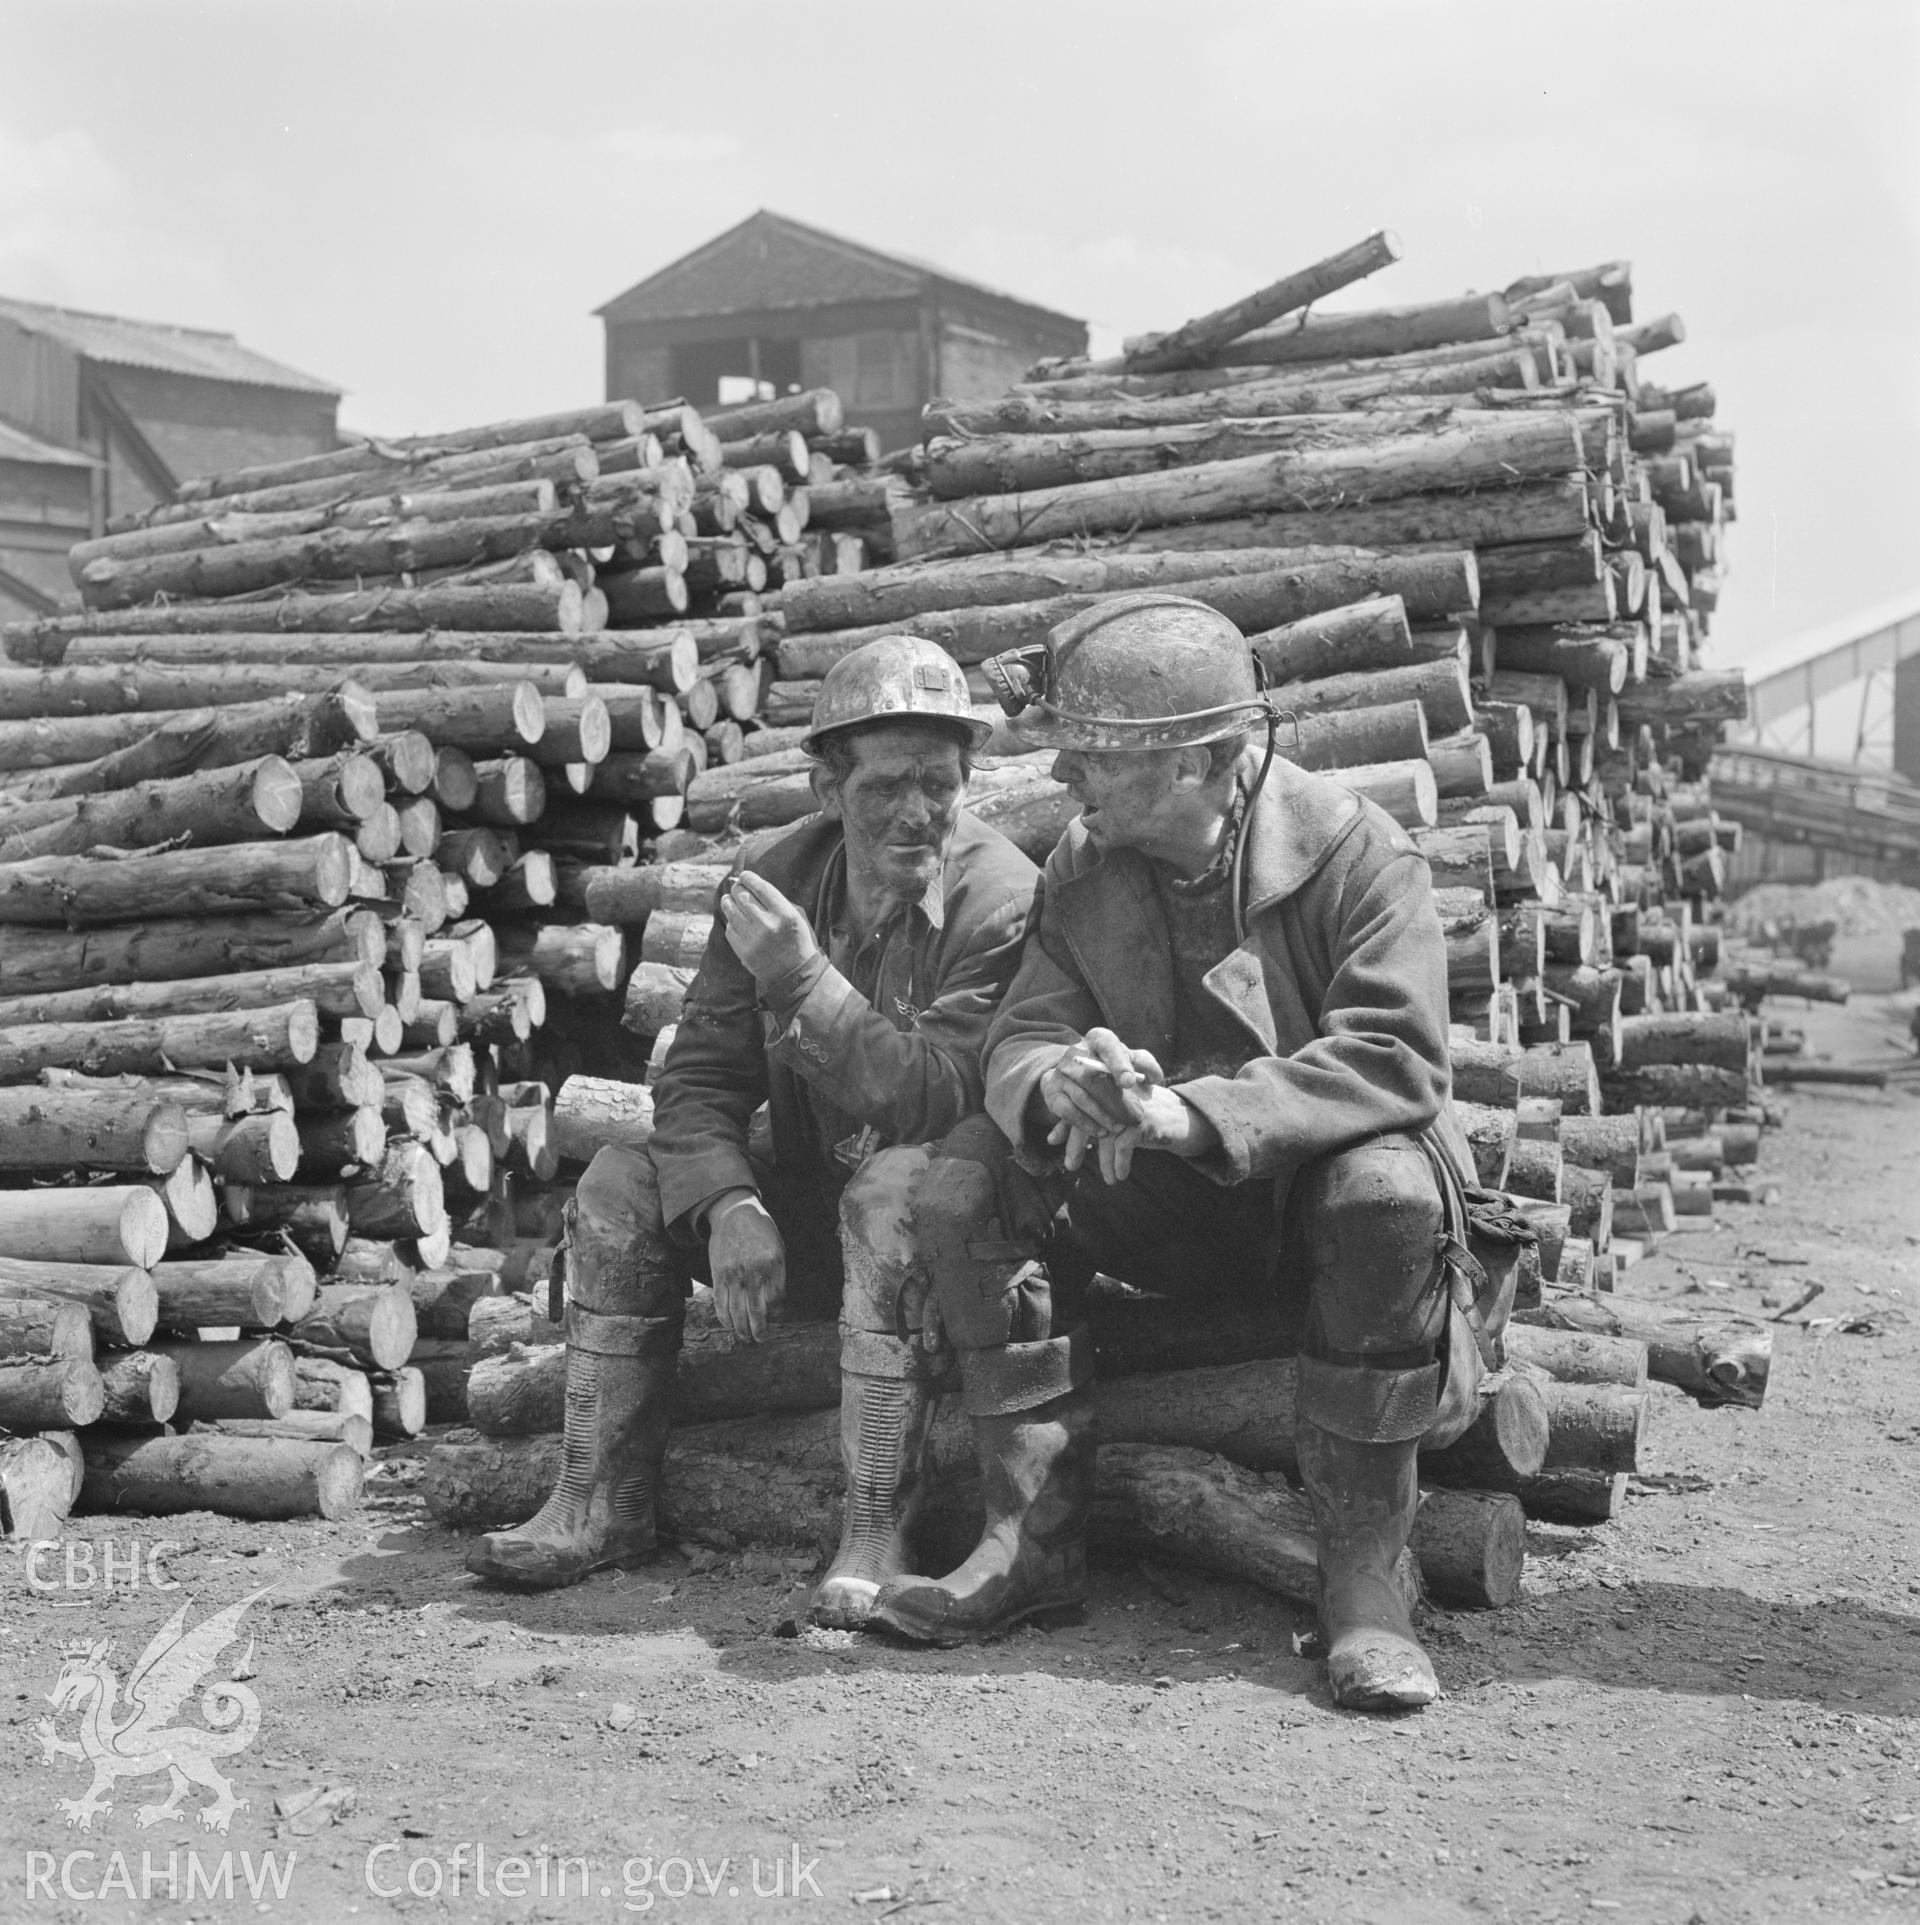 Digital copy of an acetate negative showing men in timber yard at Big Pit, from the John Cornwell Collection.